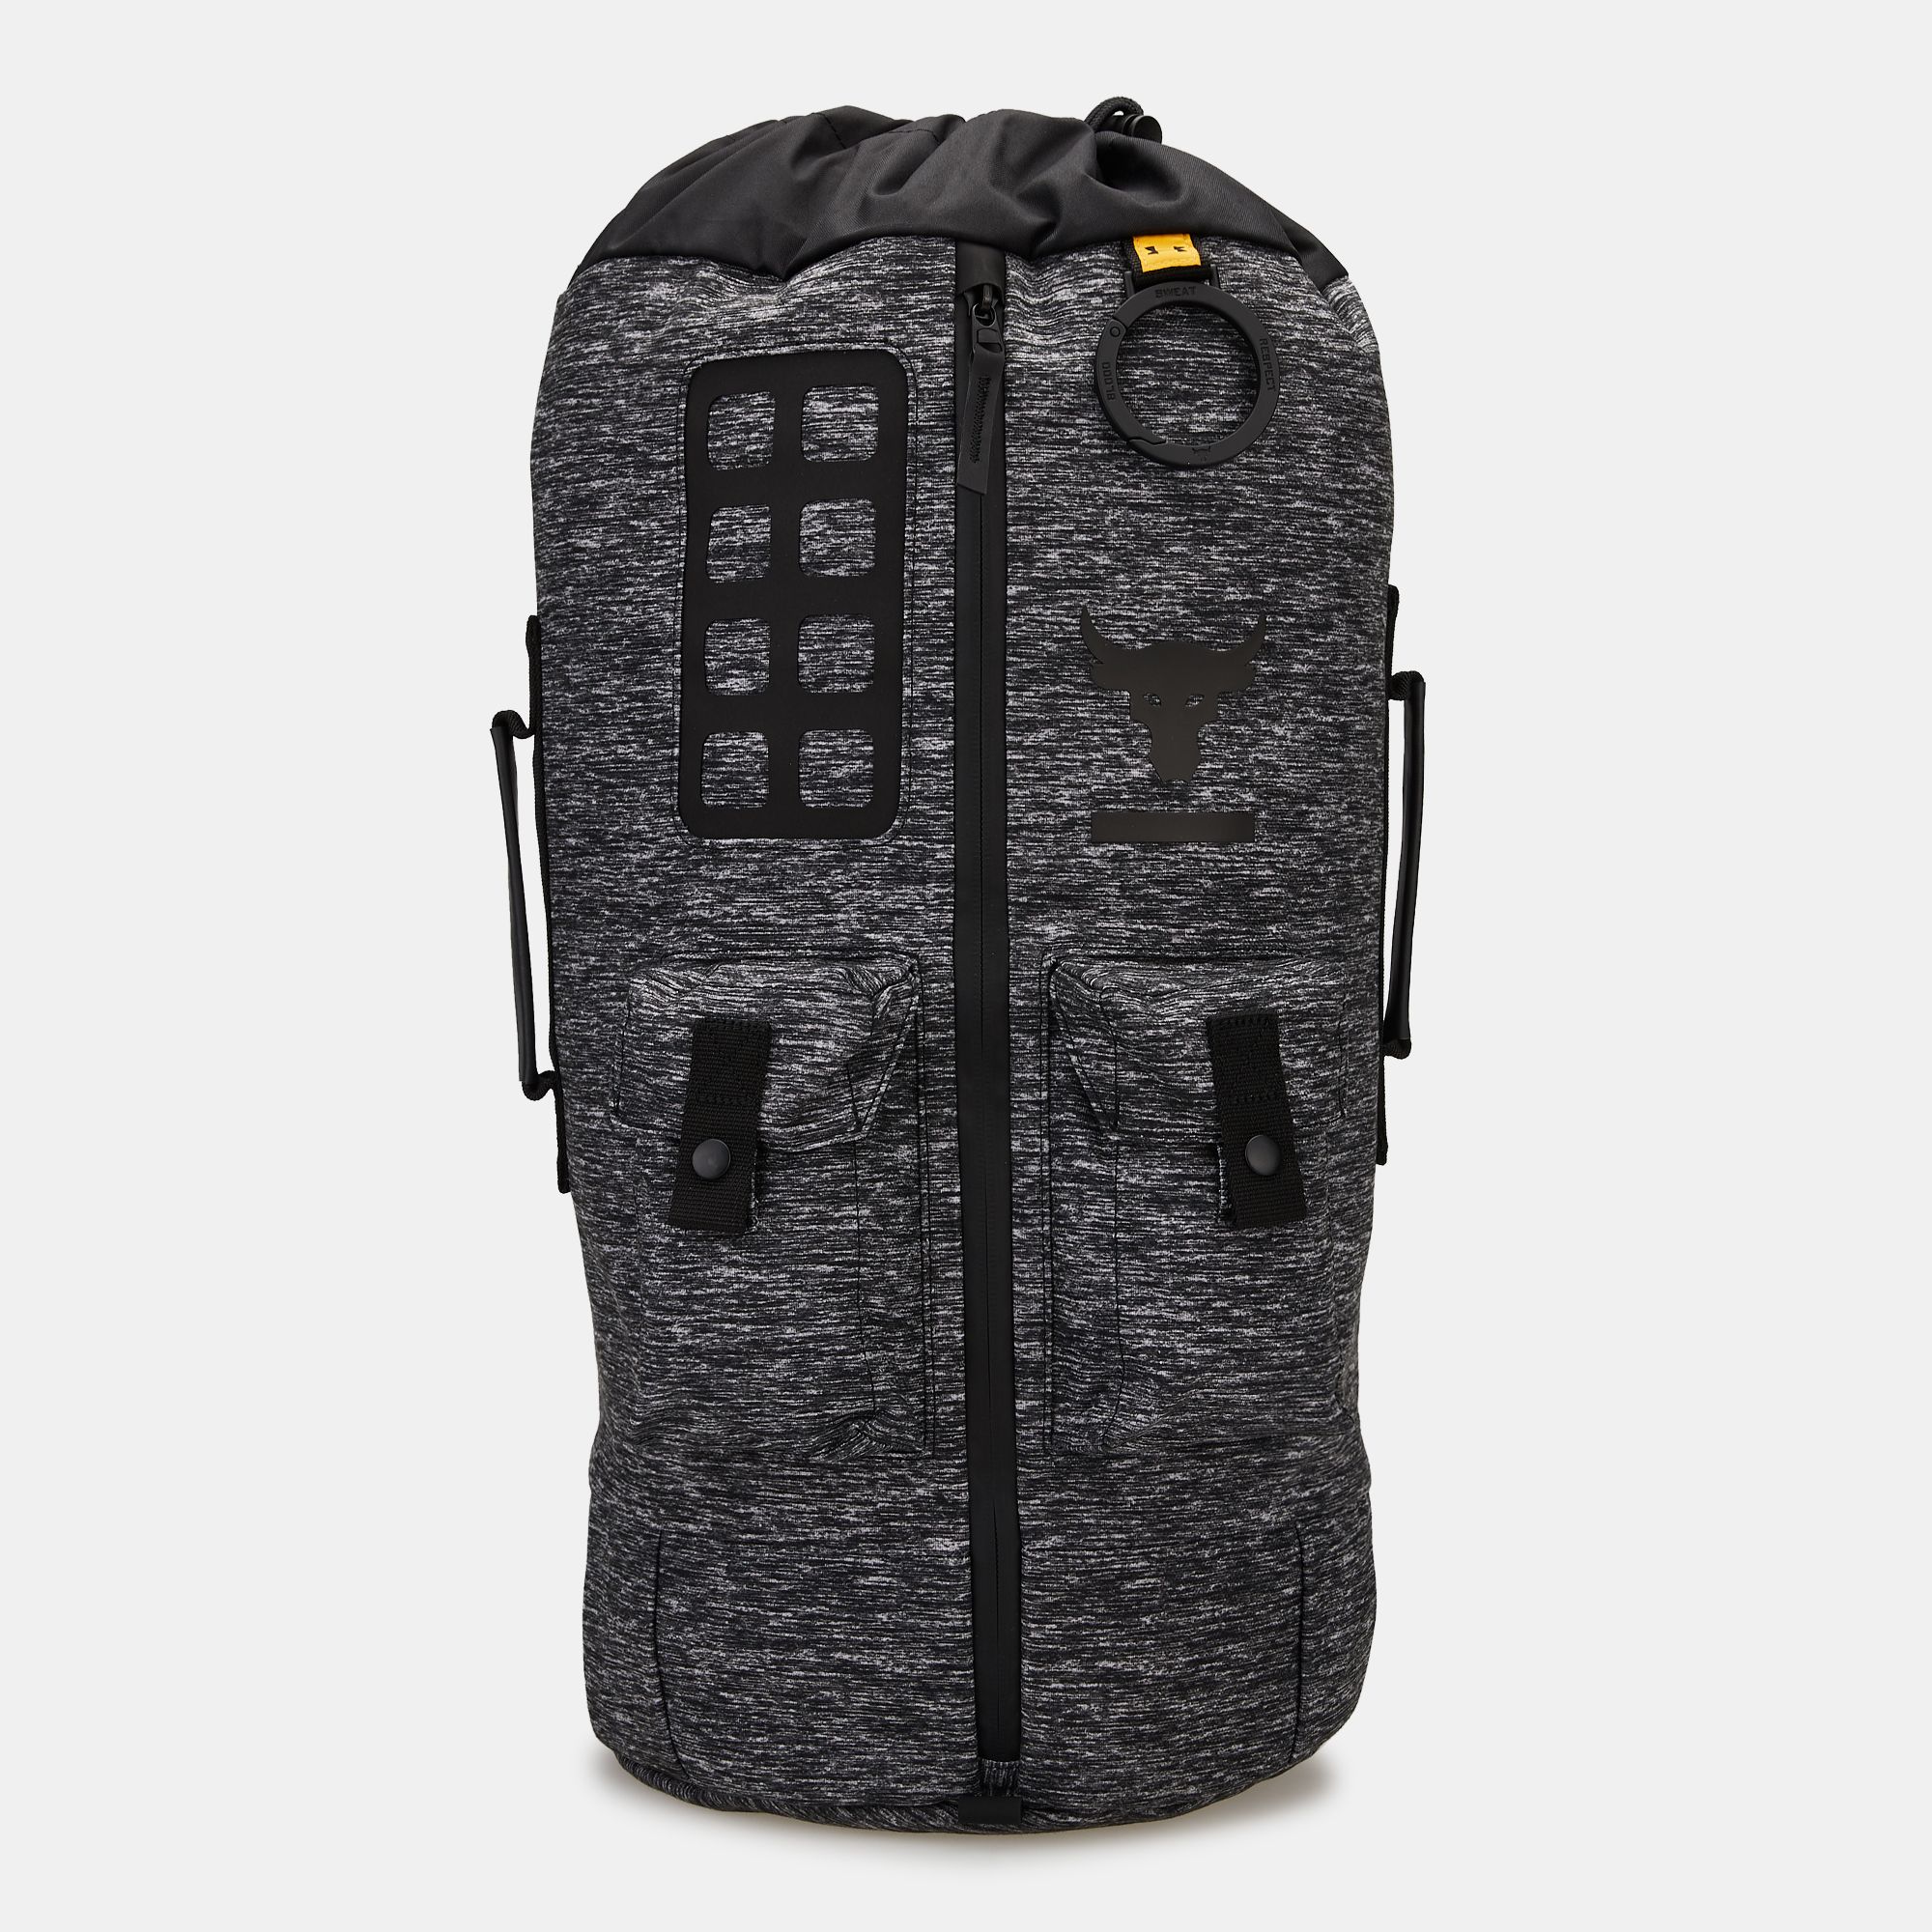 project rock duffle backpack